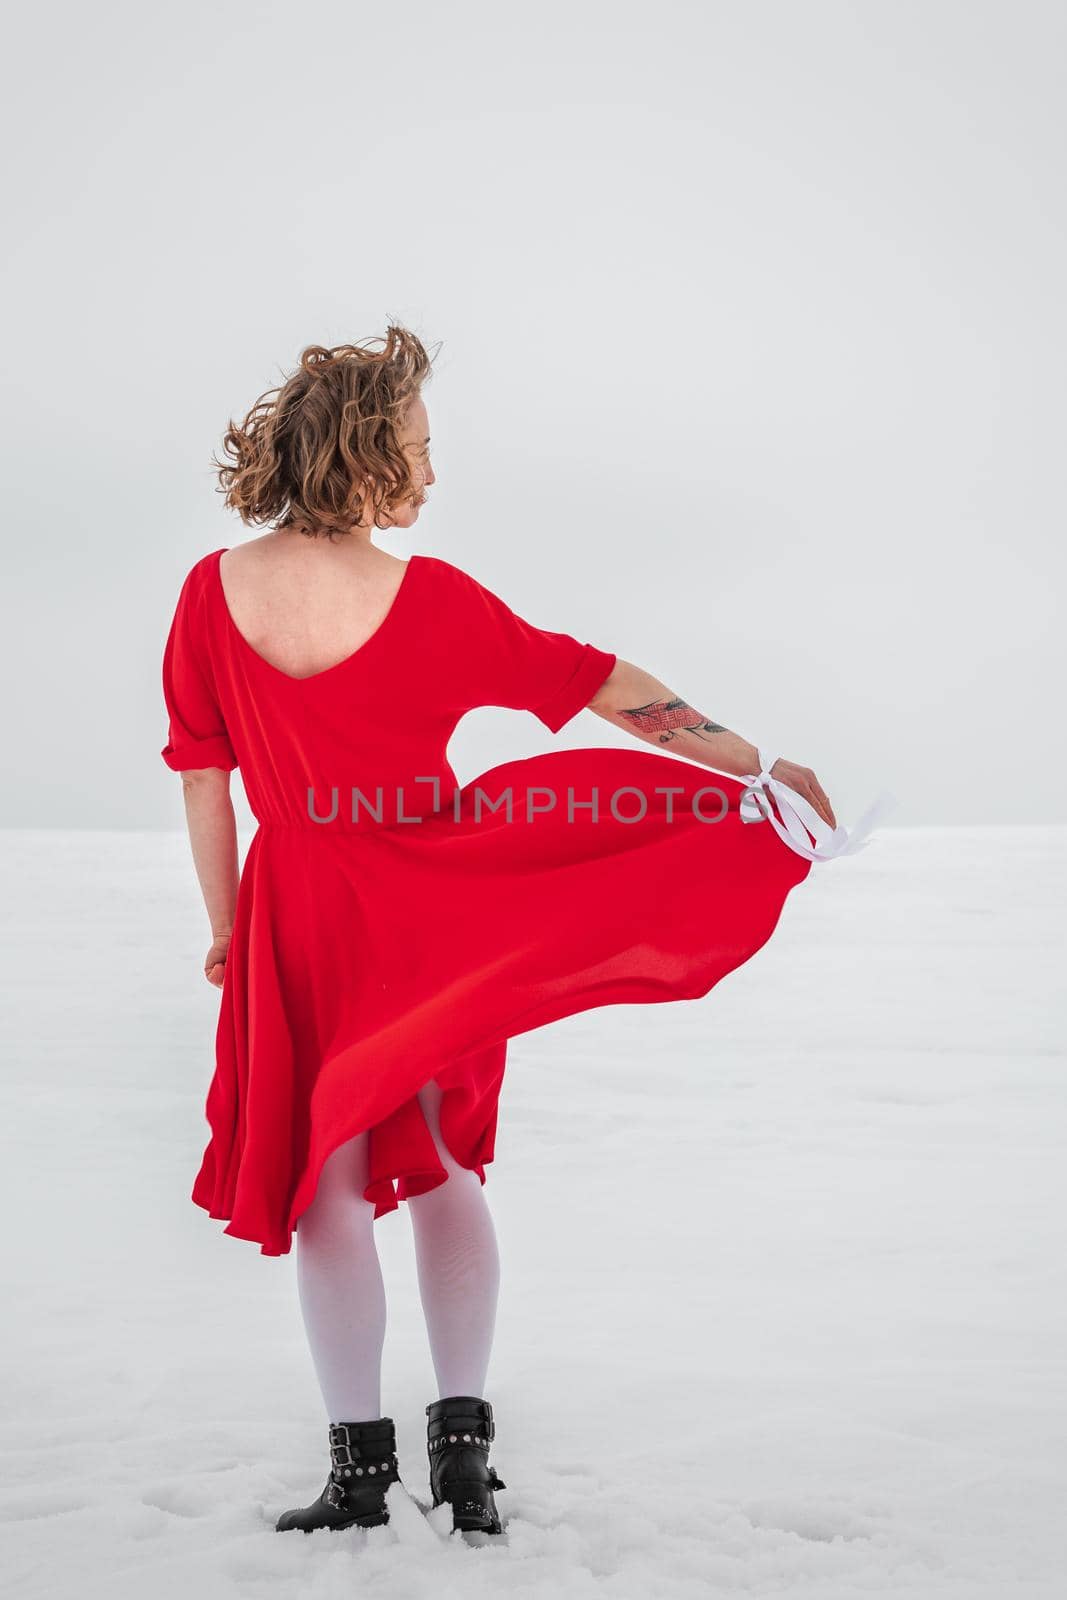 Beautiful woman in a red dress posing outside on a snowy field. She is wearing red dress and have tattoo on her arm.